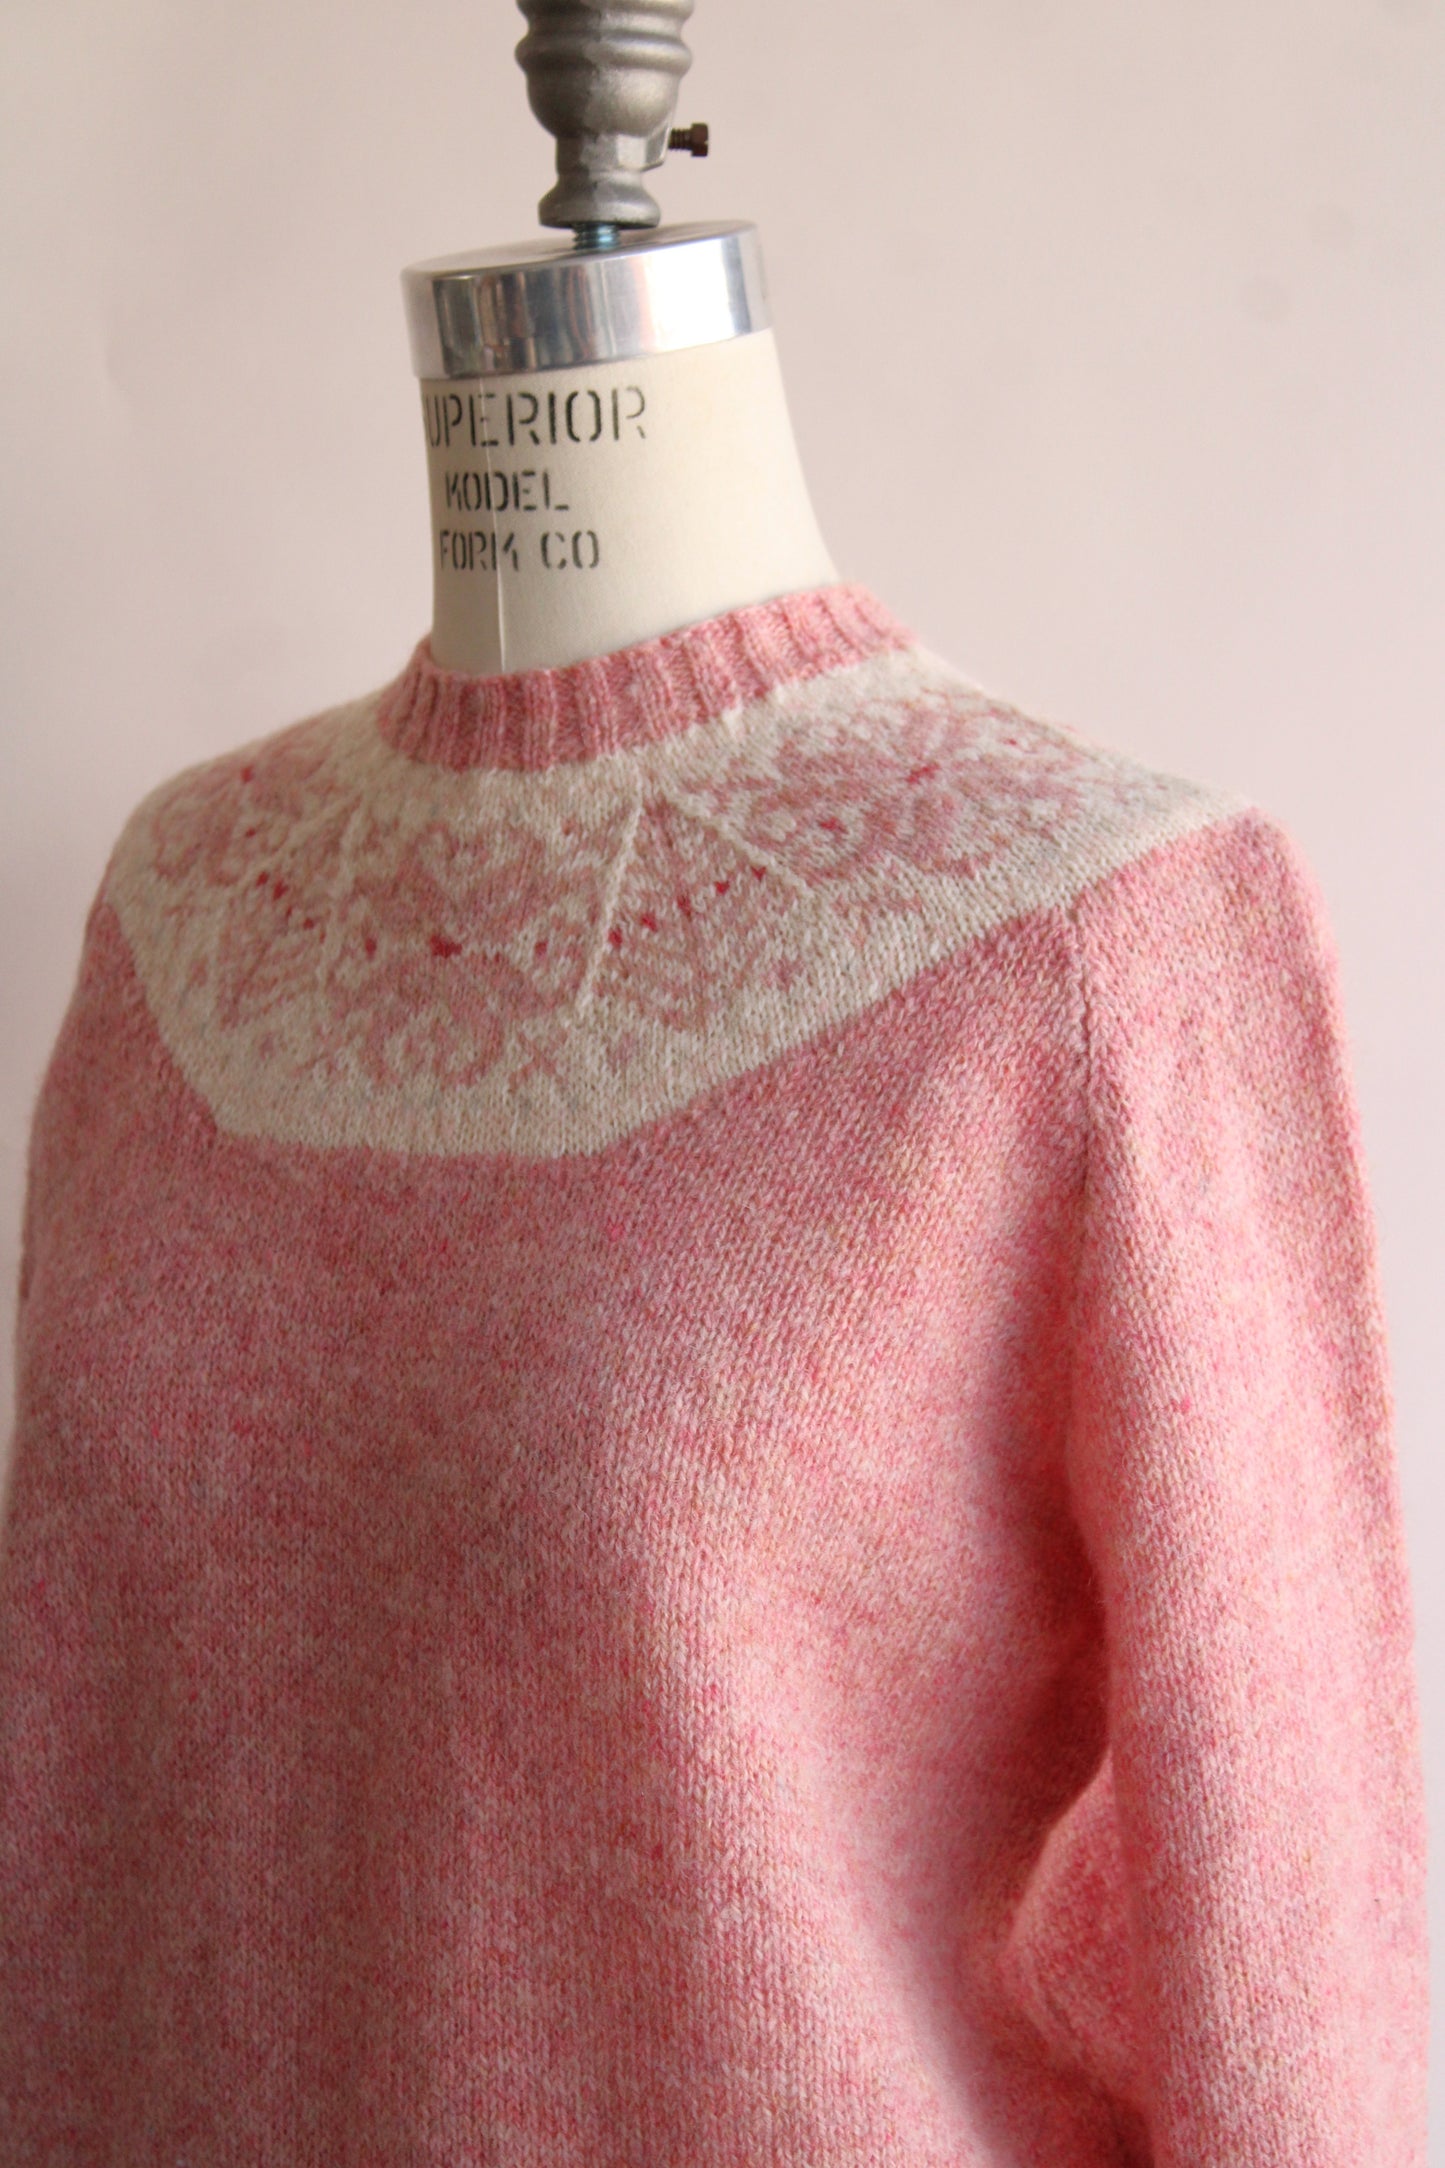 Vintage 1970s Nordic Style Pink and Cream Sweater